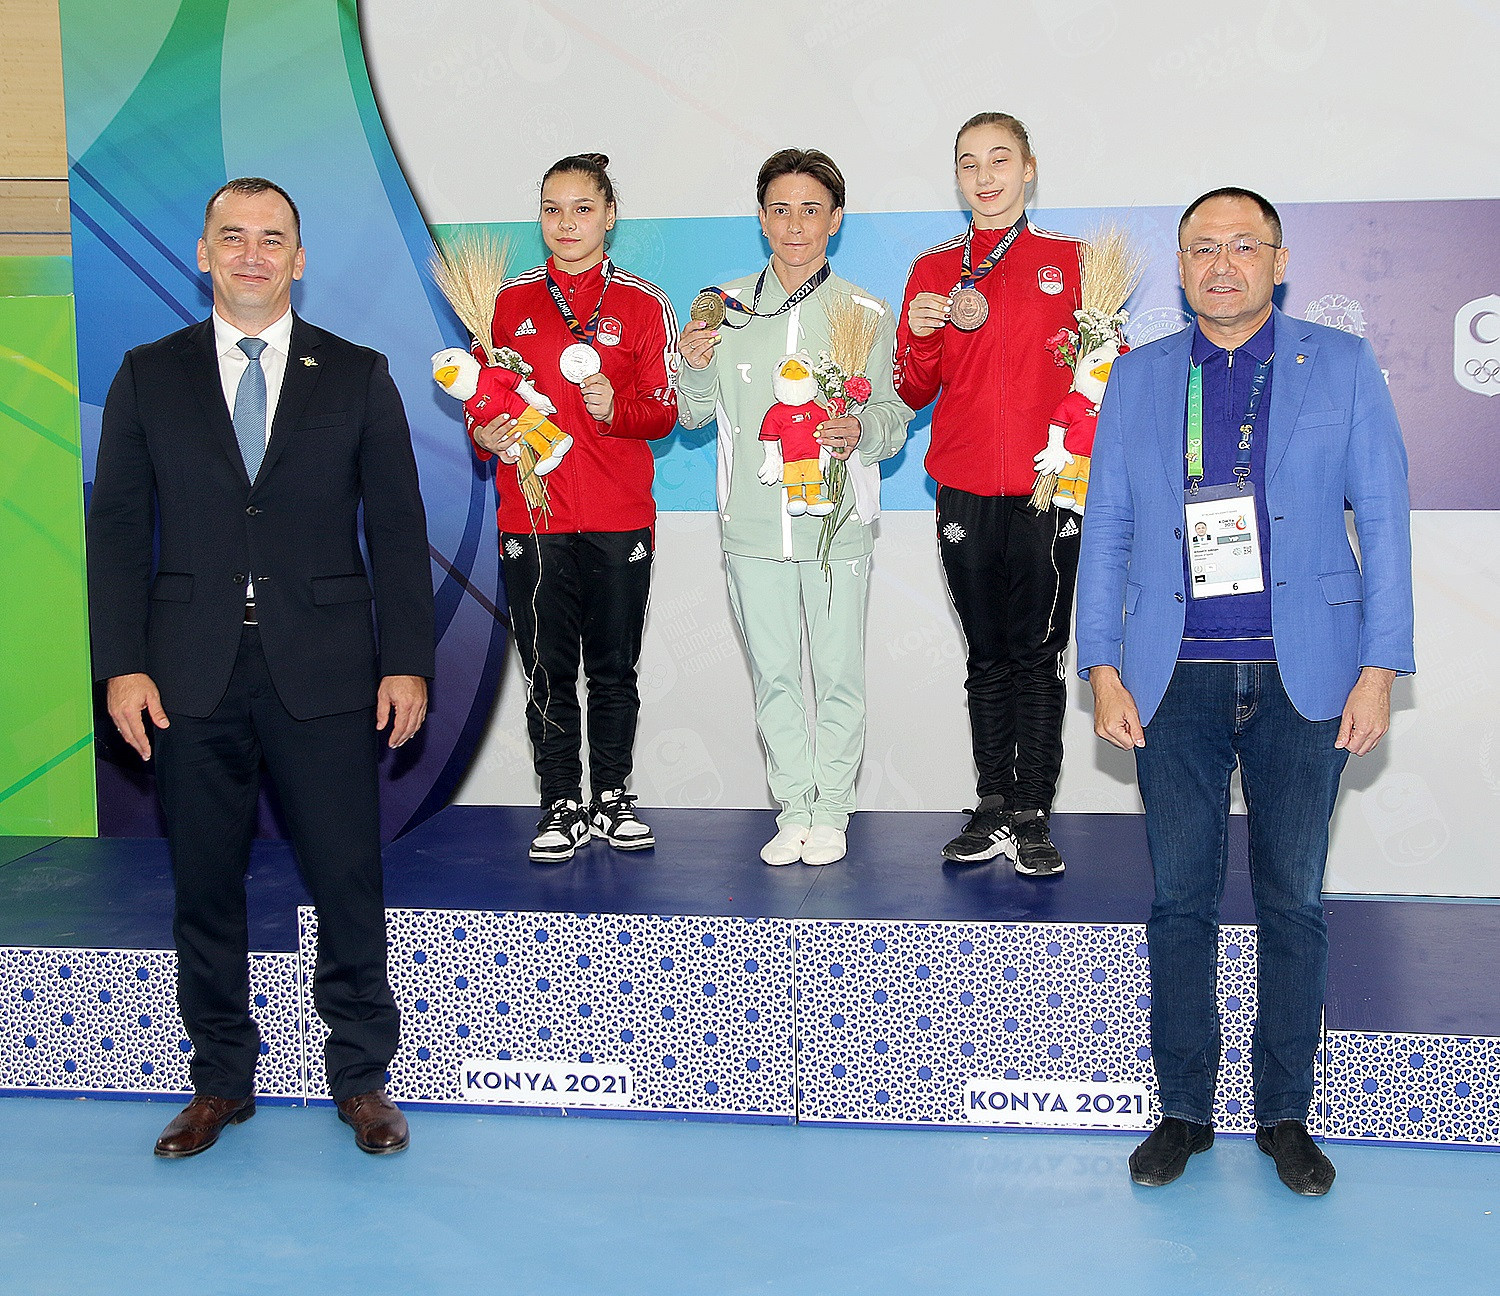 Oksana Chusovitina, centre, retired after competing at last year's Olympics in Tokyo before deciding to return to action ©Konya 2021